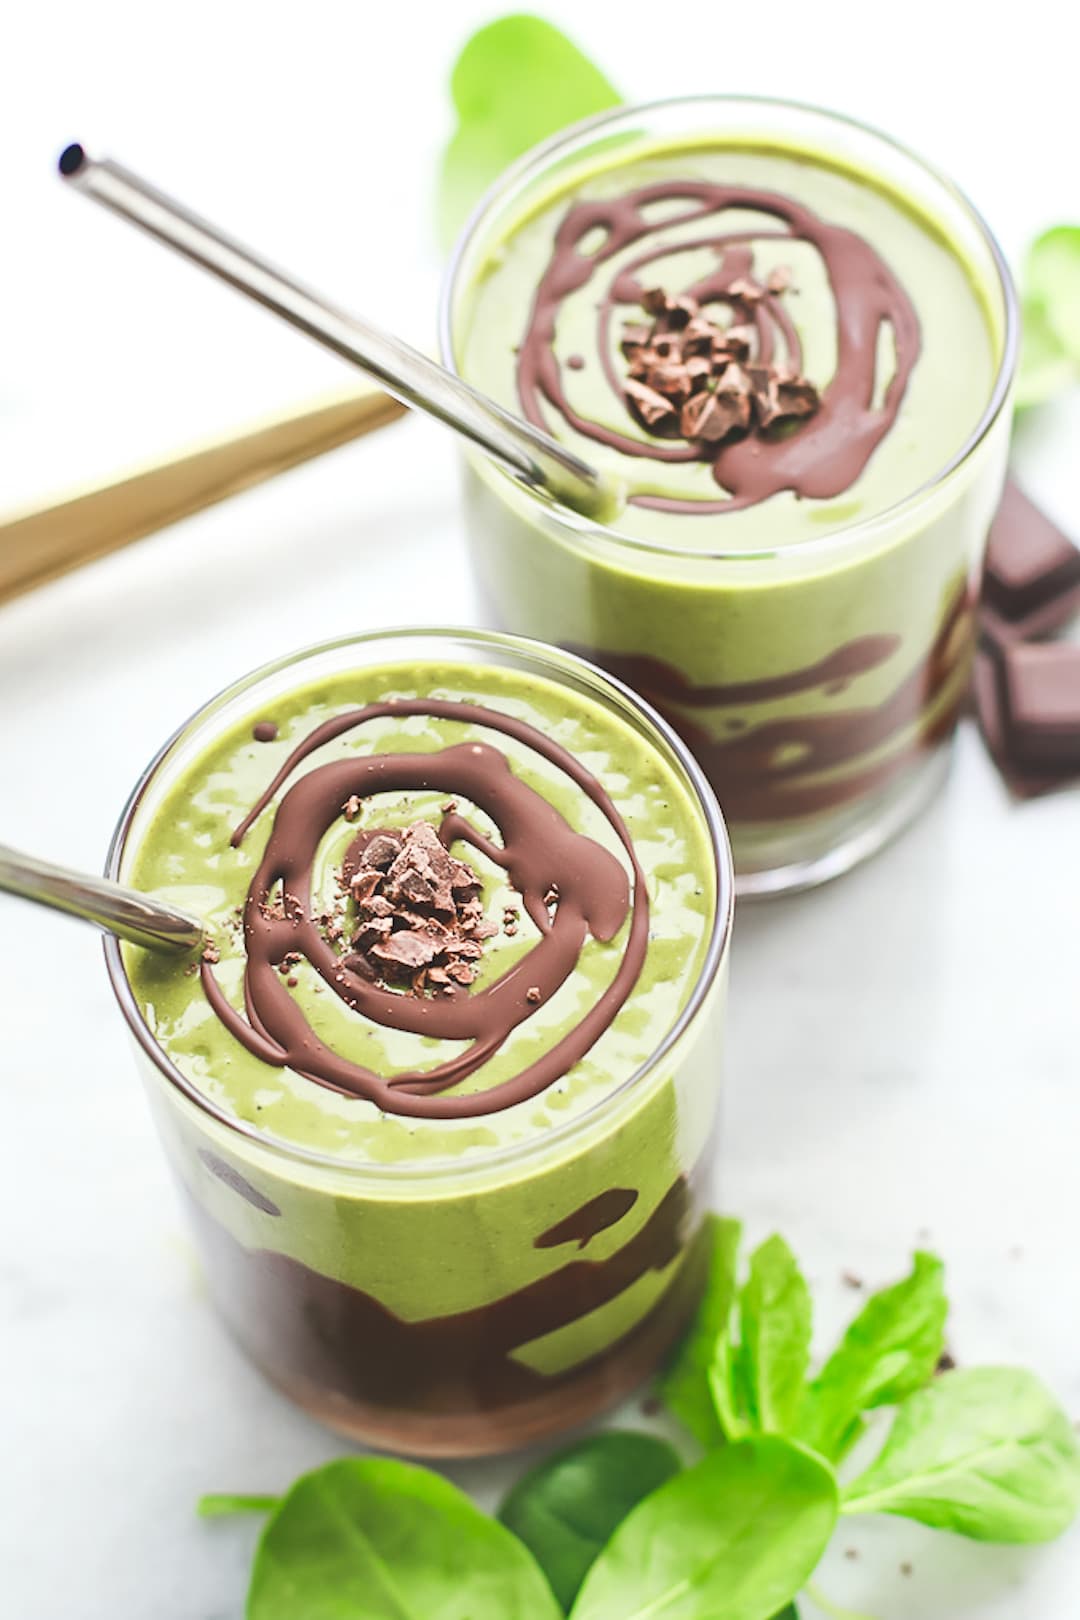 8 Self-Care Ideas For The Holiday Season - Mint Chocolate Green Smoothie